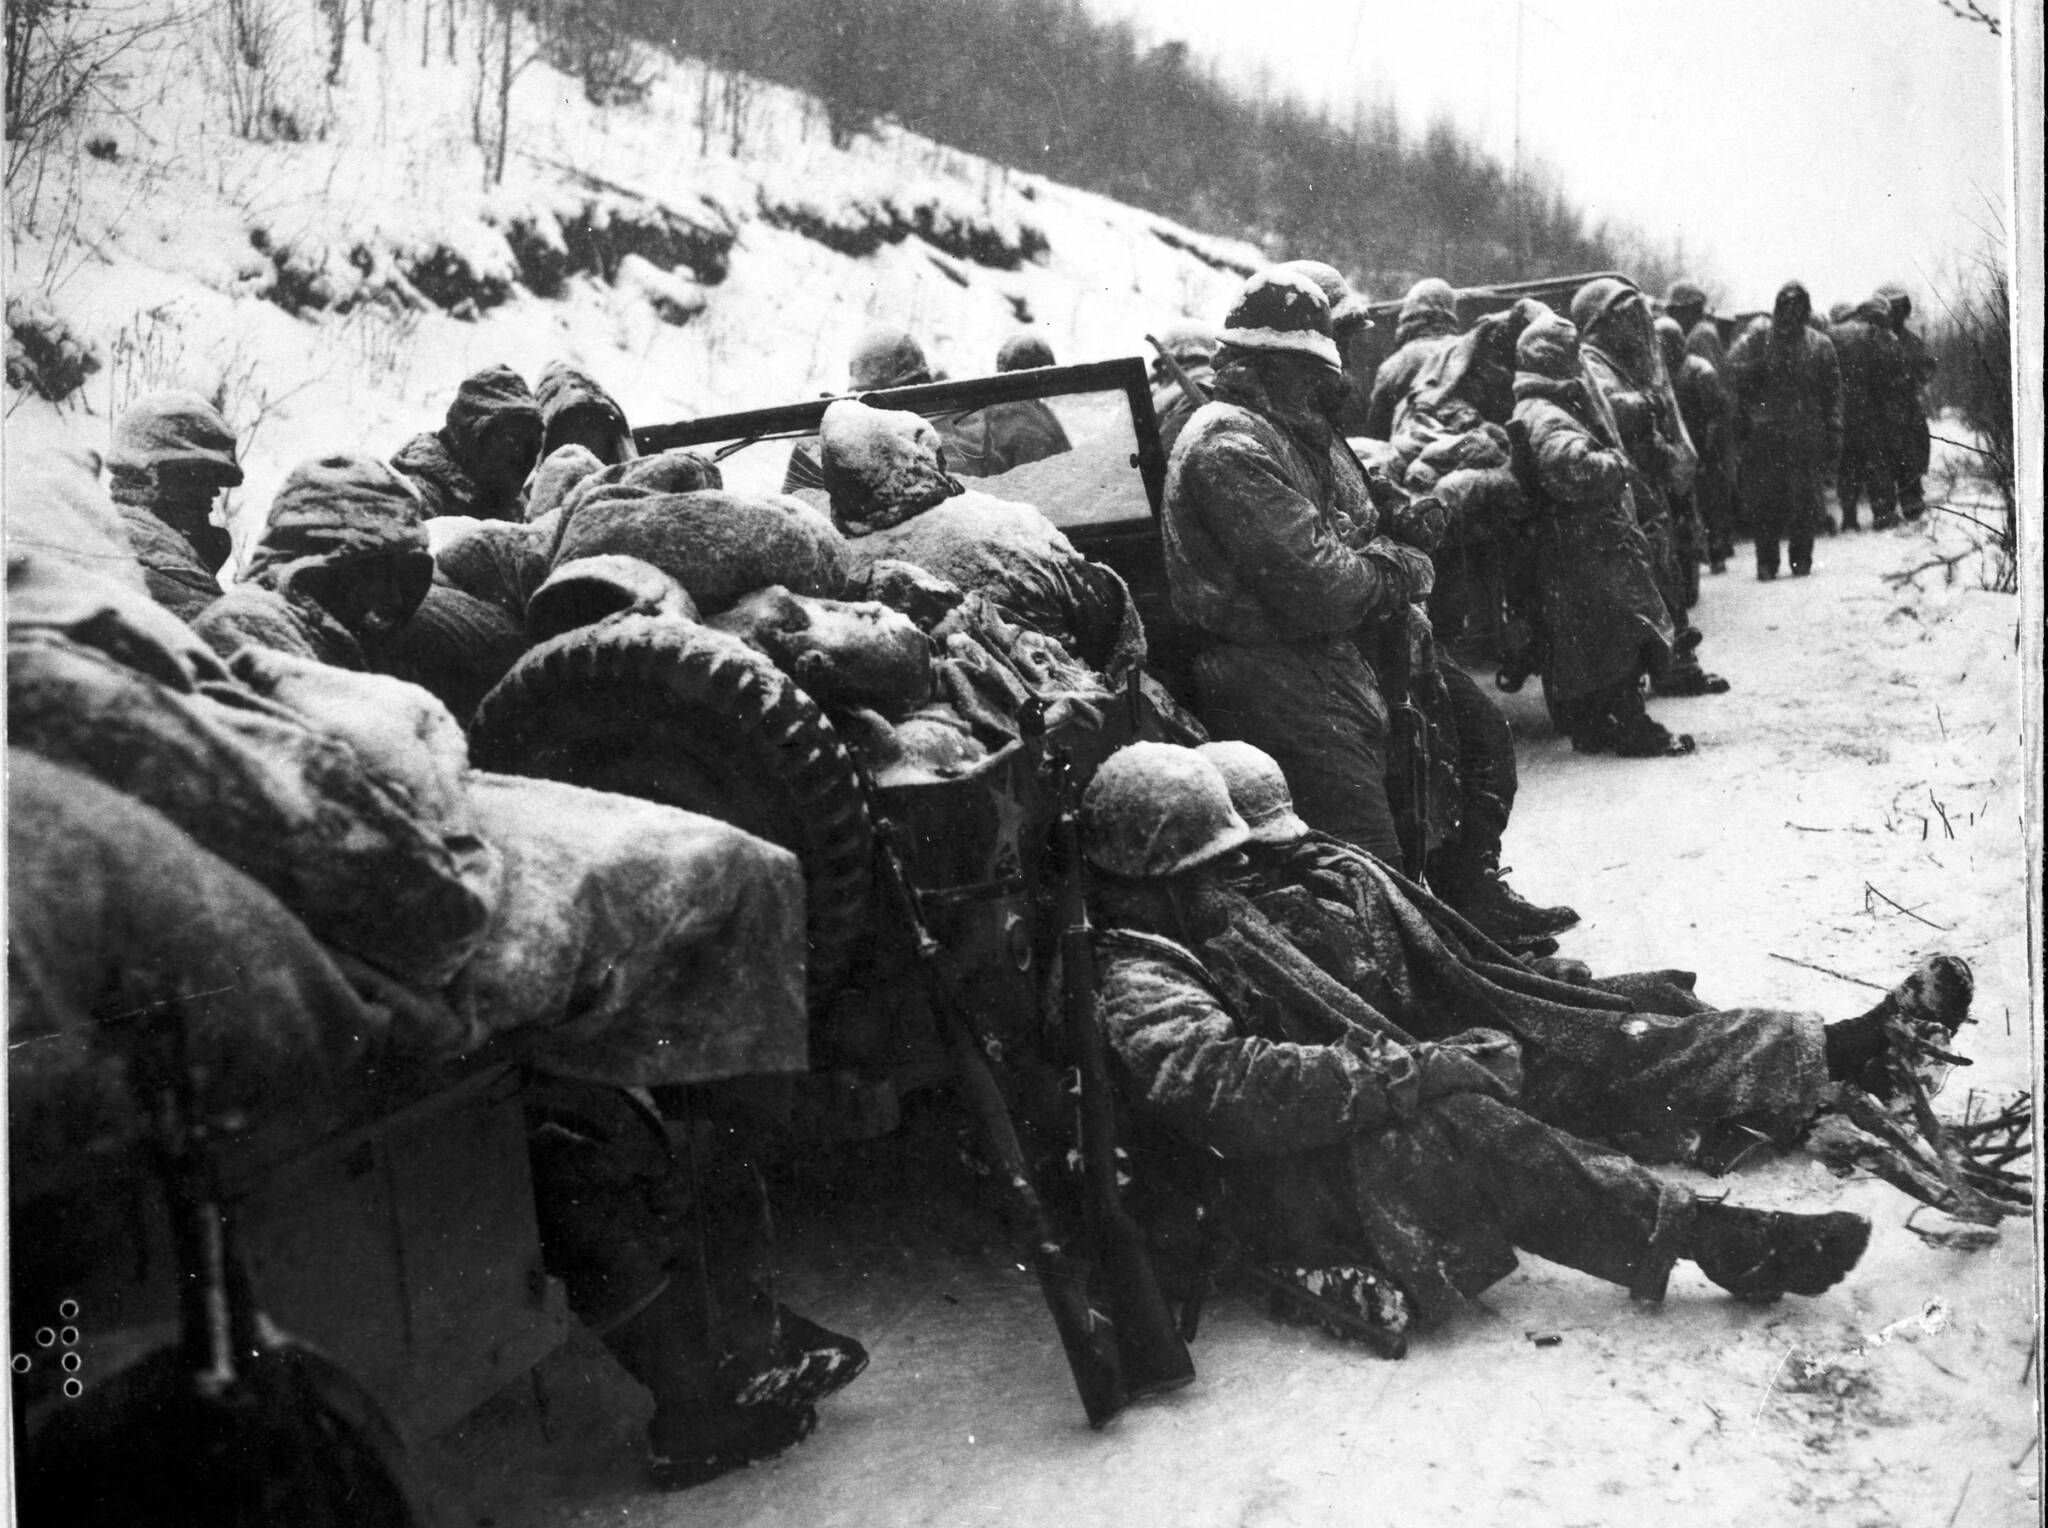 Marines of the 5th and 7th regiments who hurled back a surprise onslaught by three Chinese communist divisions wait to withdraw from the Chosin Reservoir area circa December 1950. (National Archives photo)